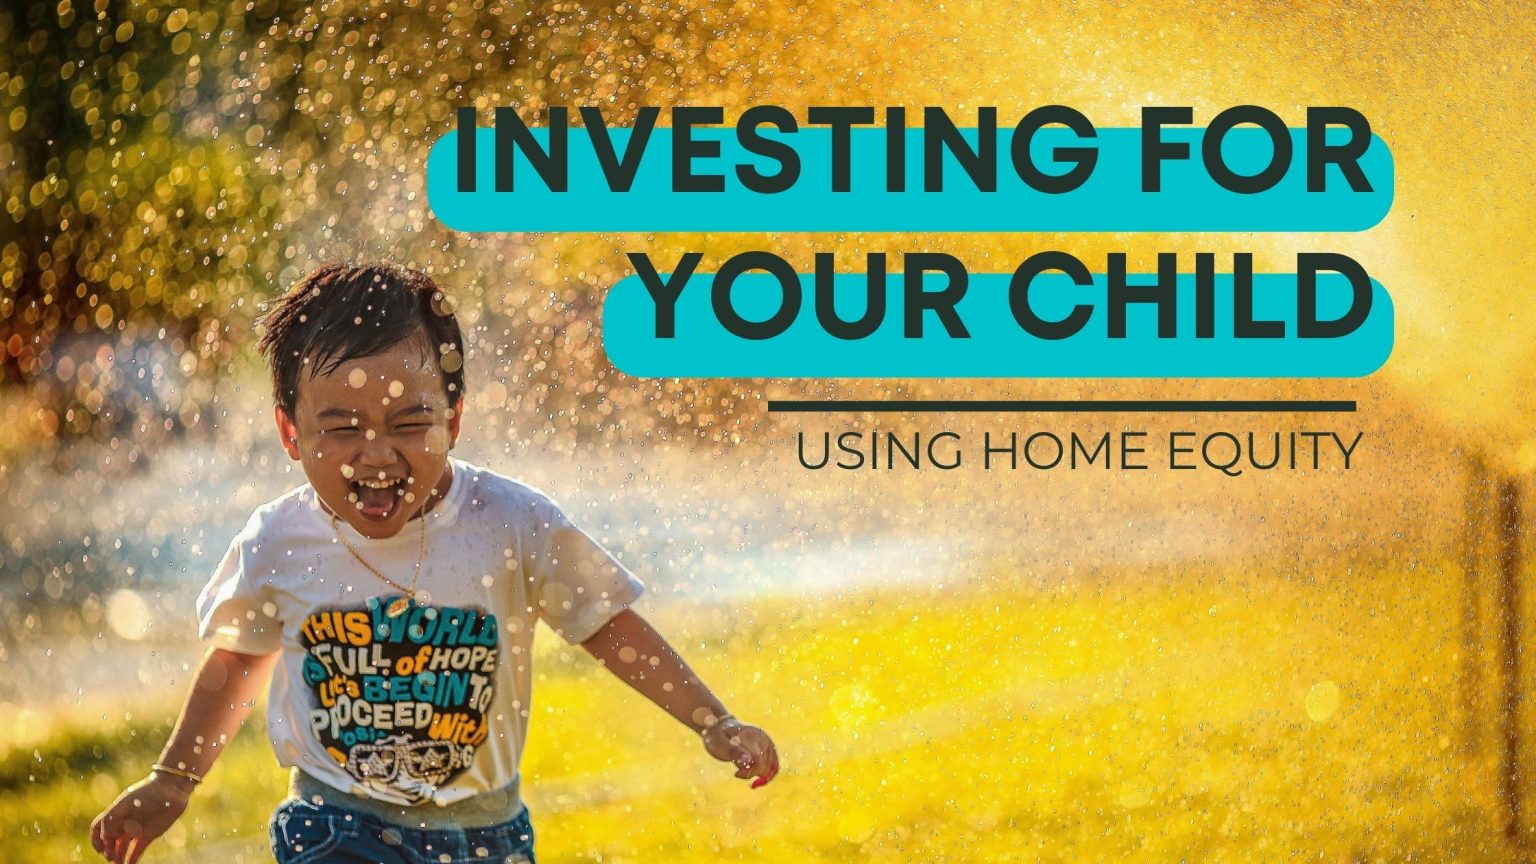 Investing For Your Child - Use Home Equity To Buy A Condo